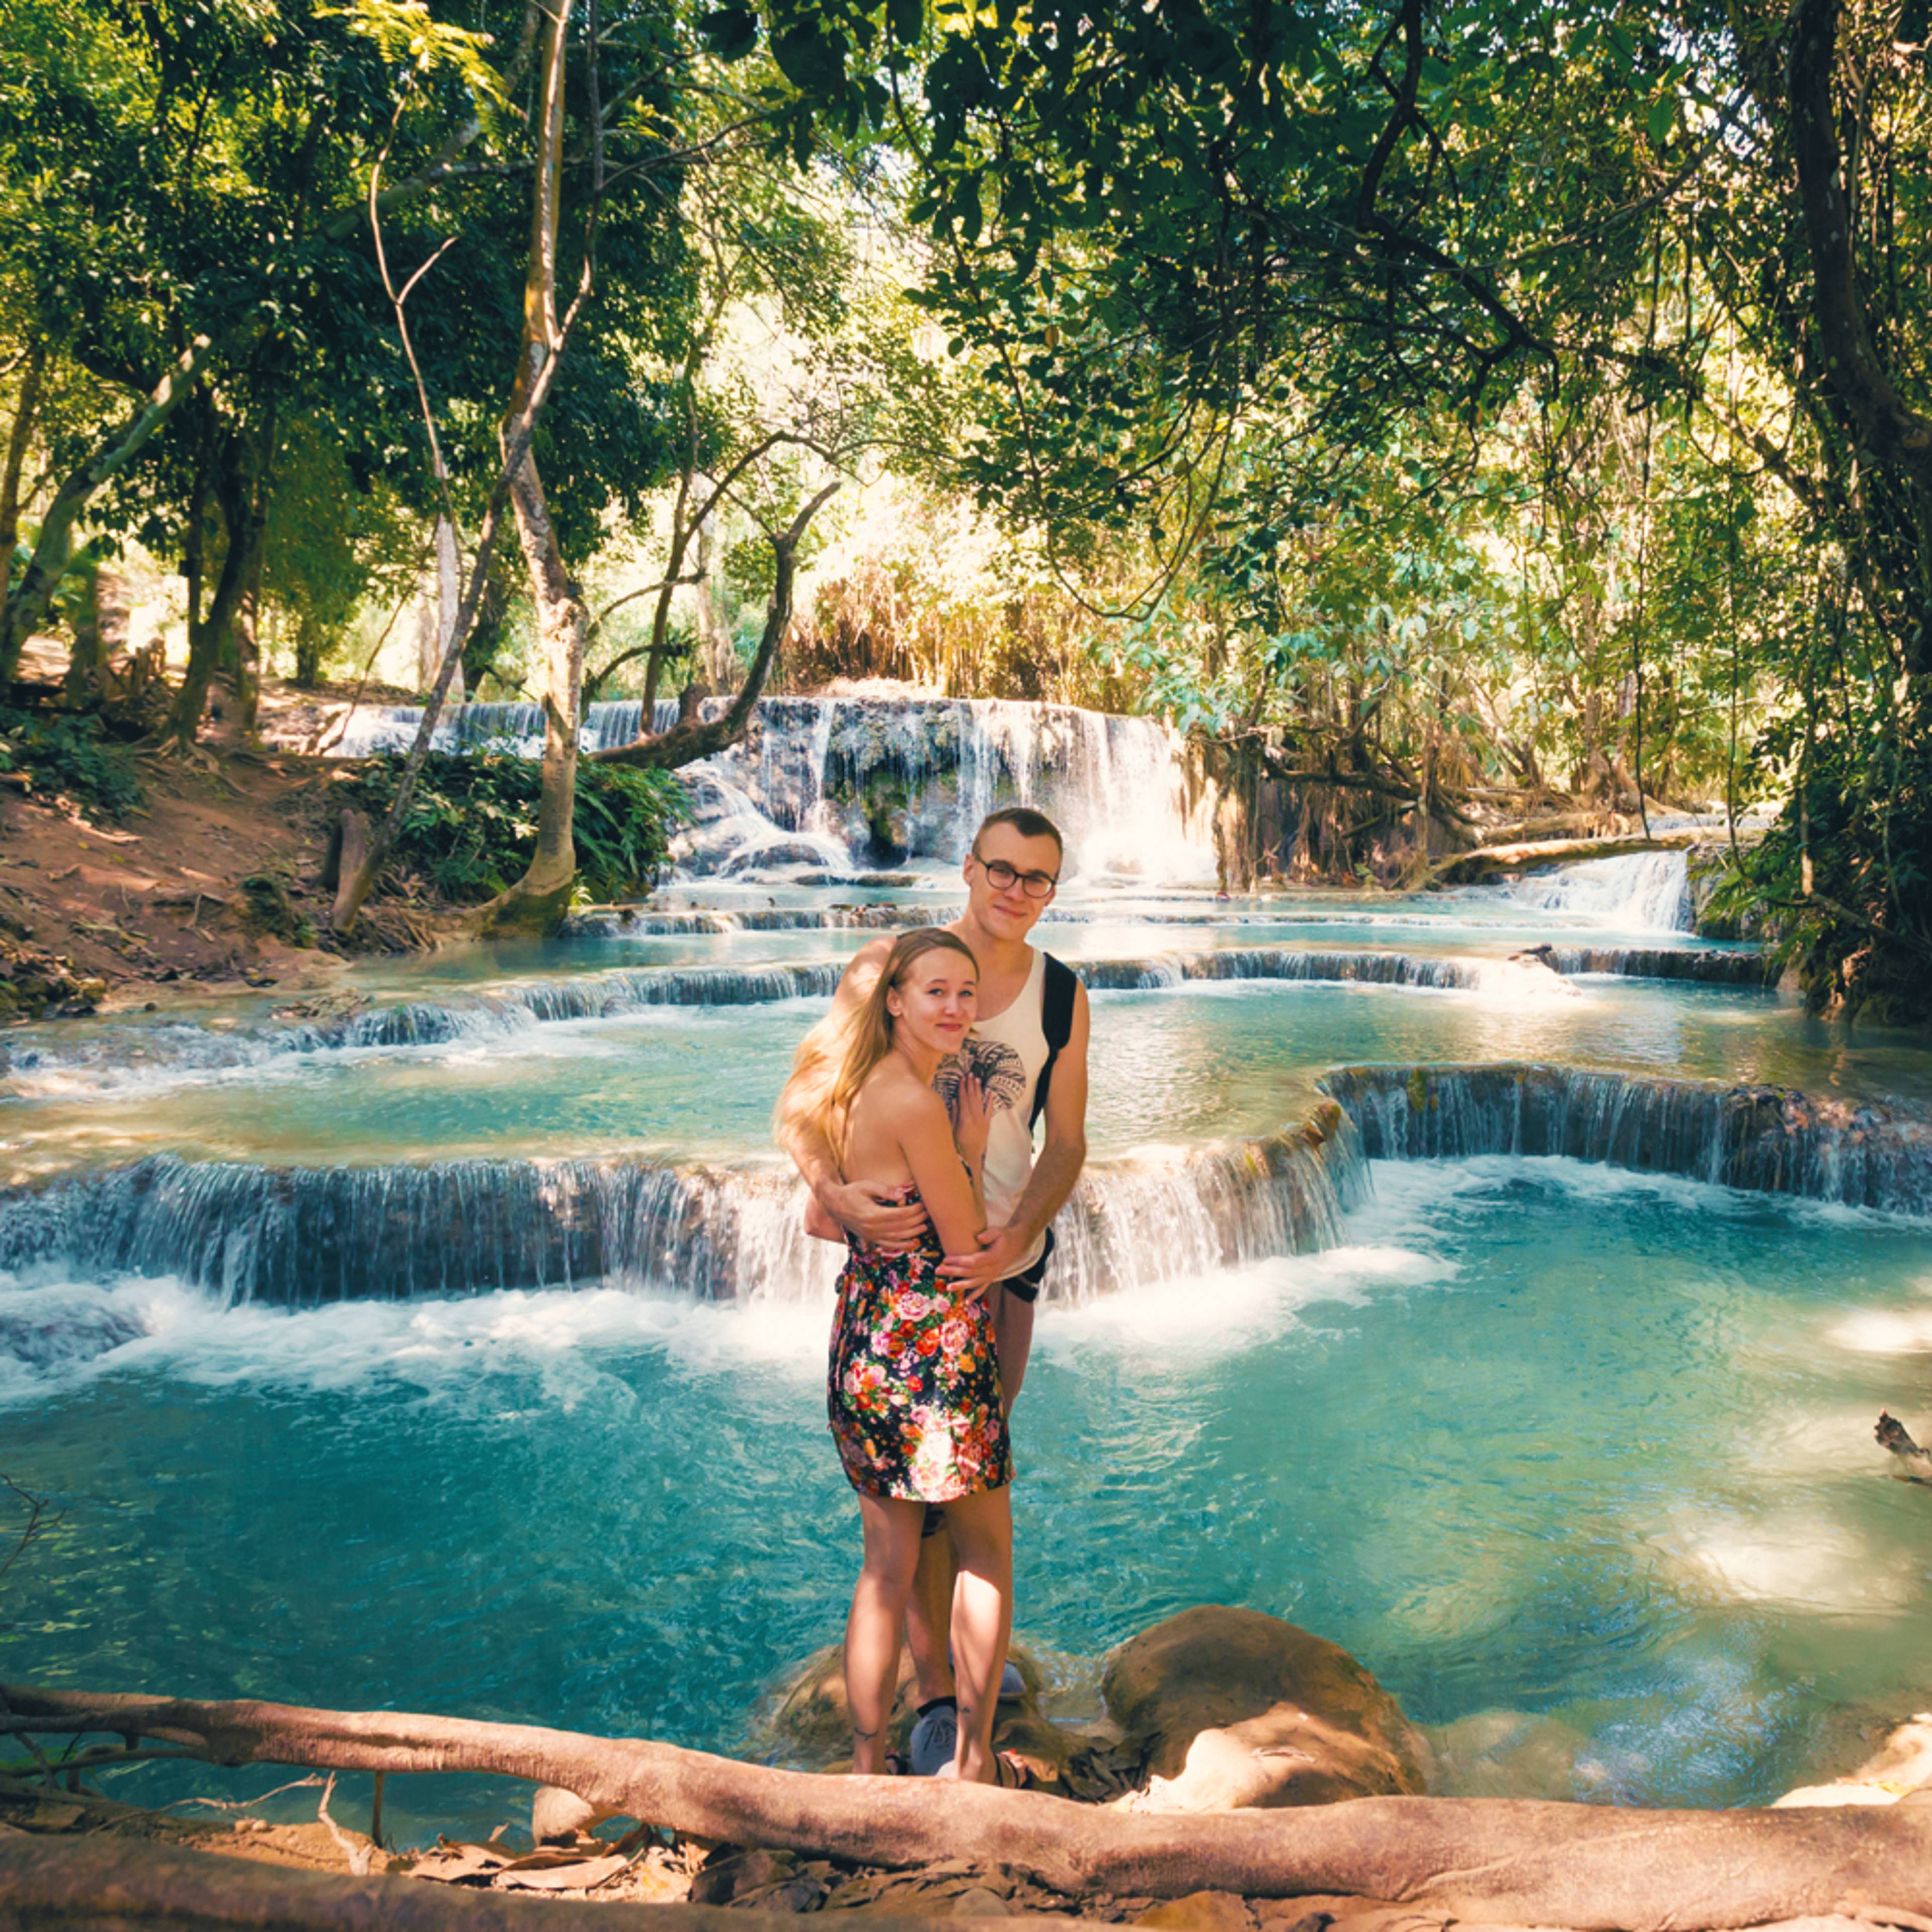 Design your romantic getaway with a local expert in Laos